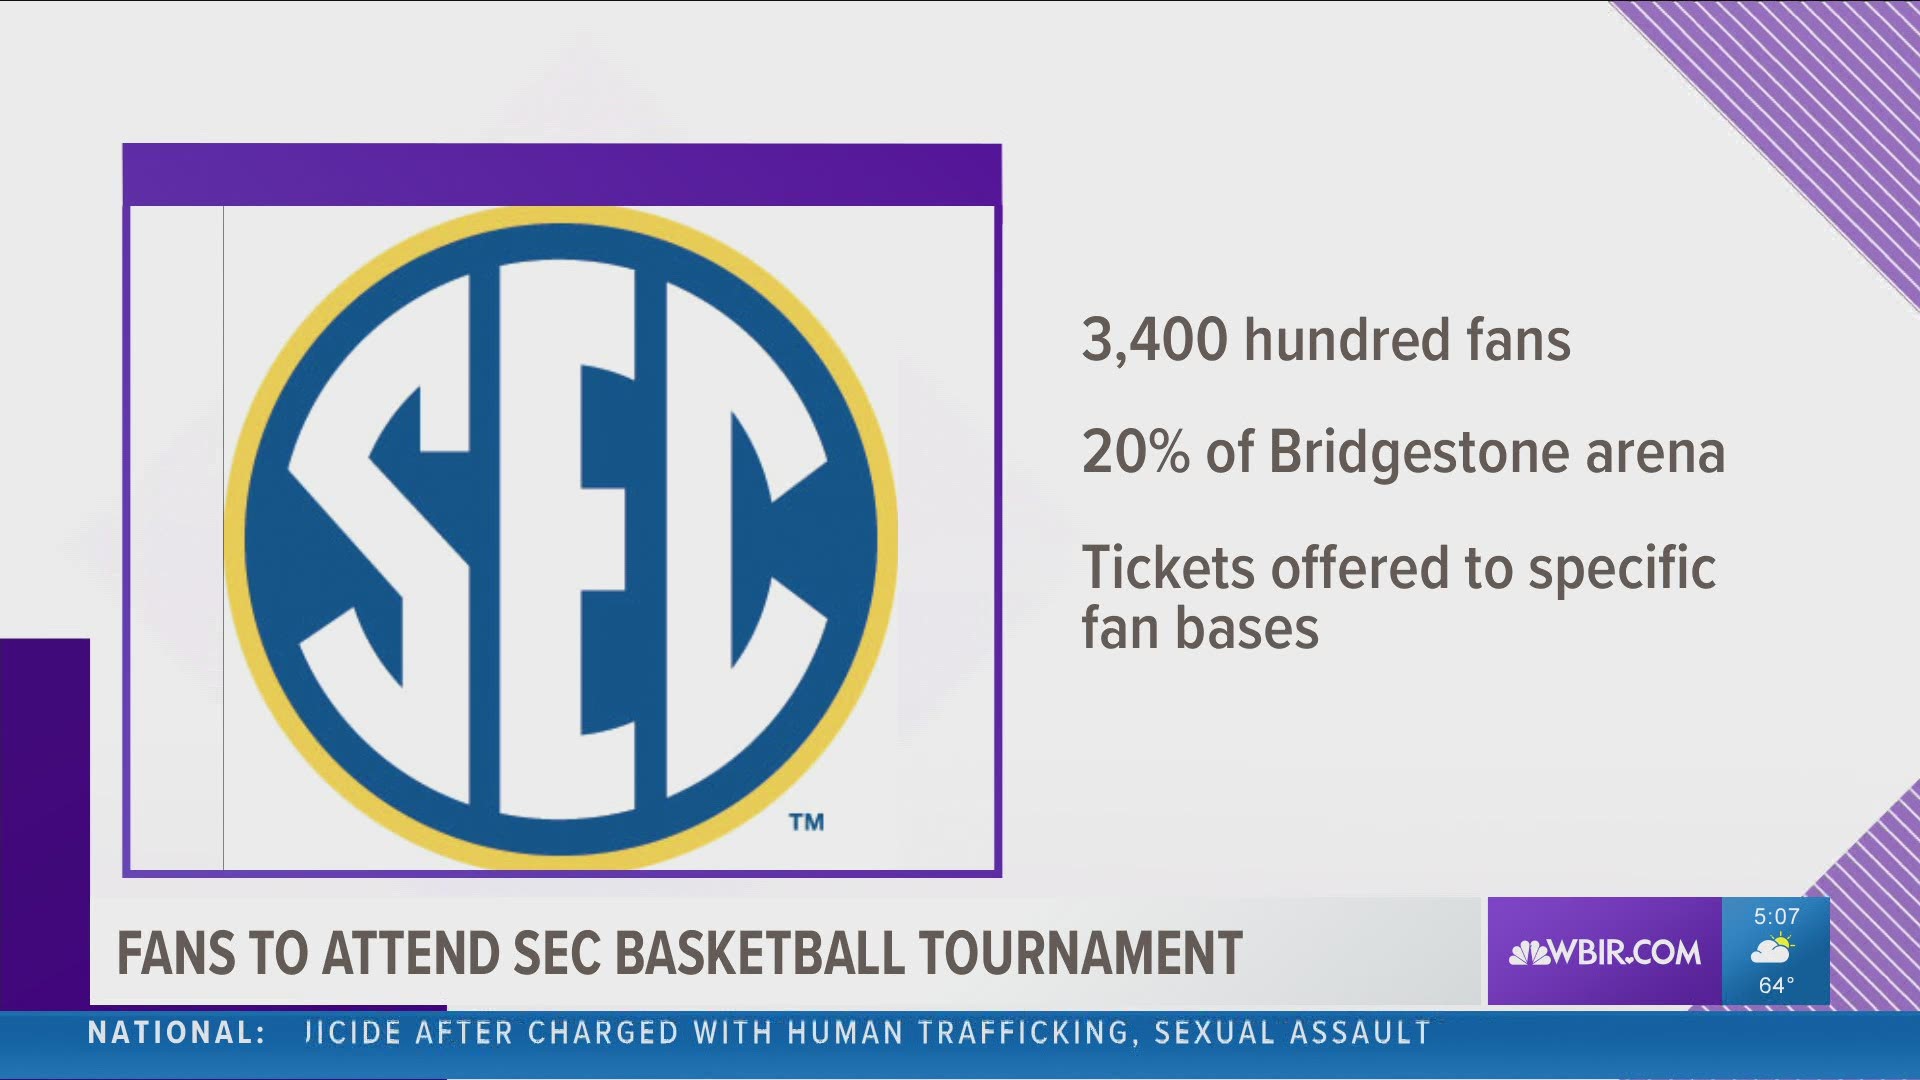 Fans will be able to attend the SEC man's basketball tournament in Nashville next month.